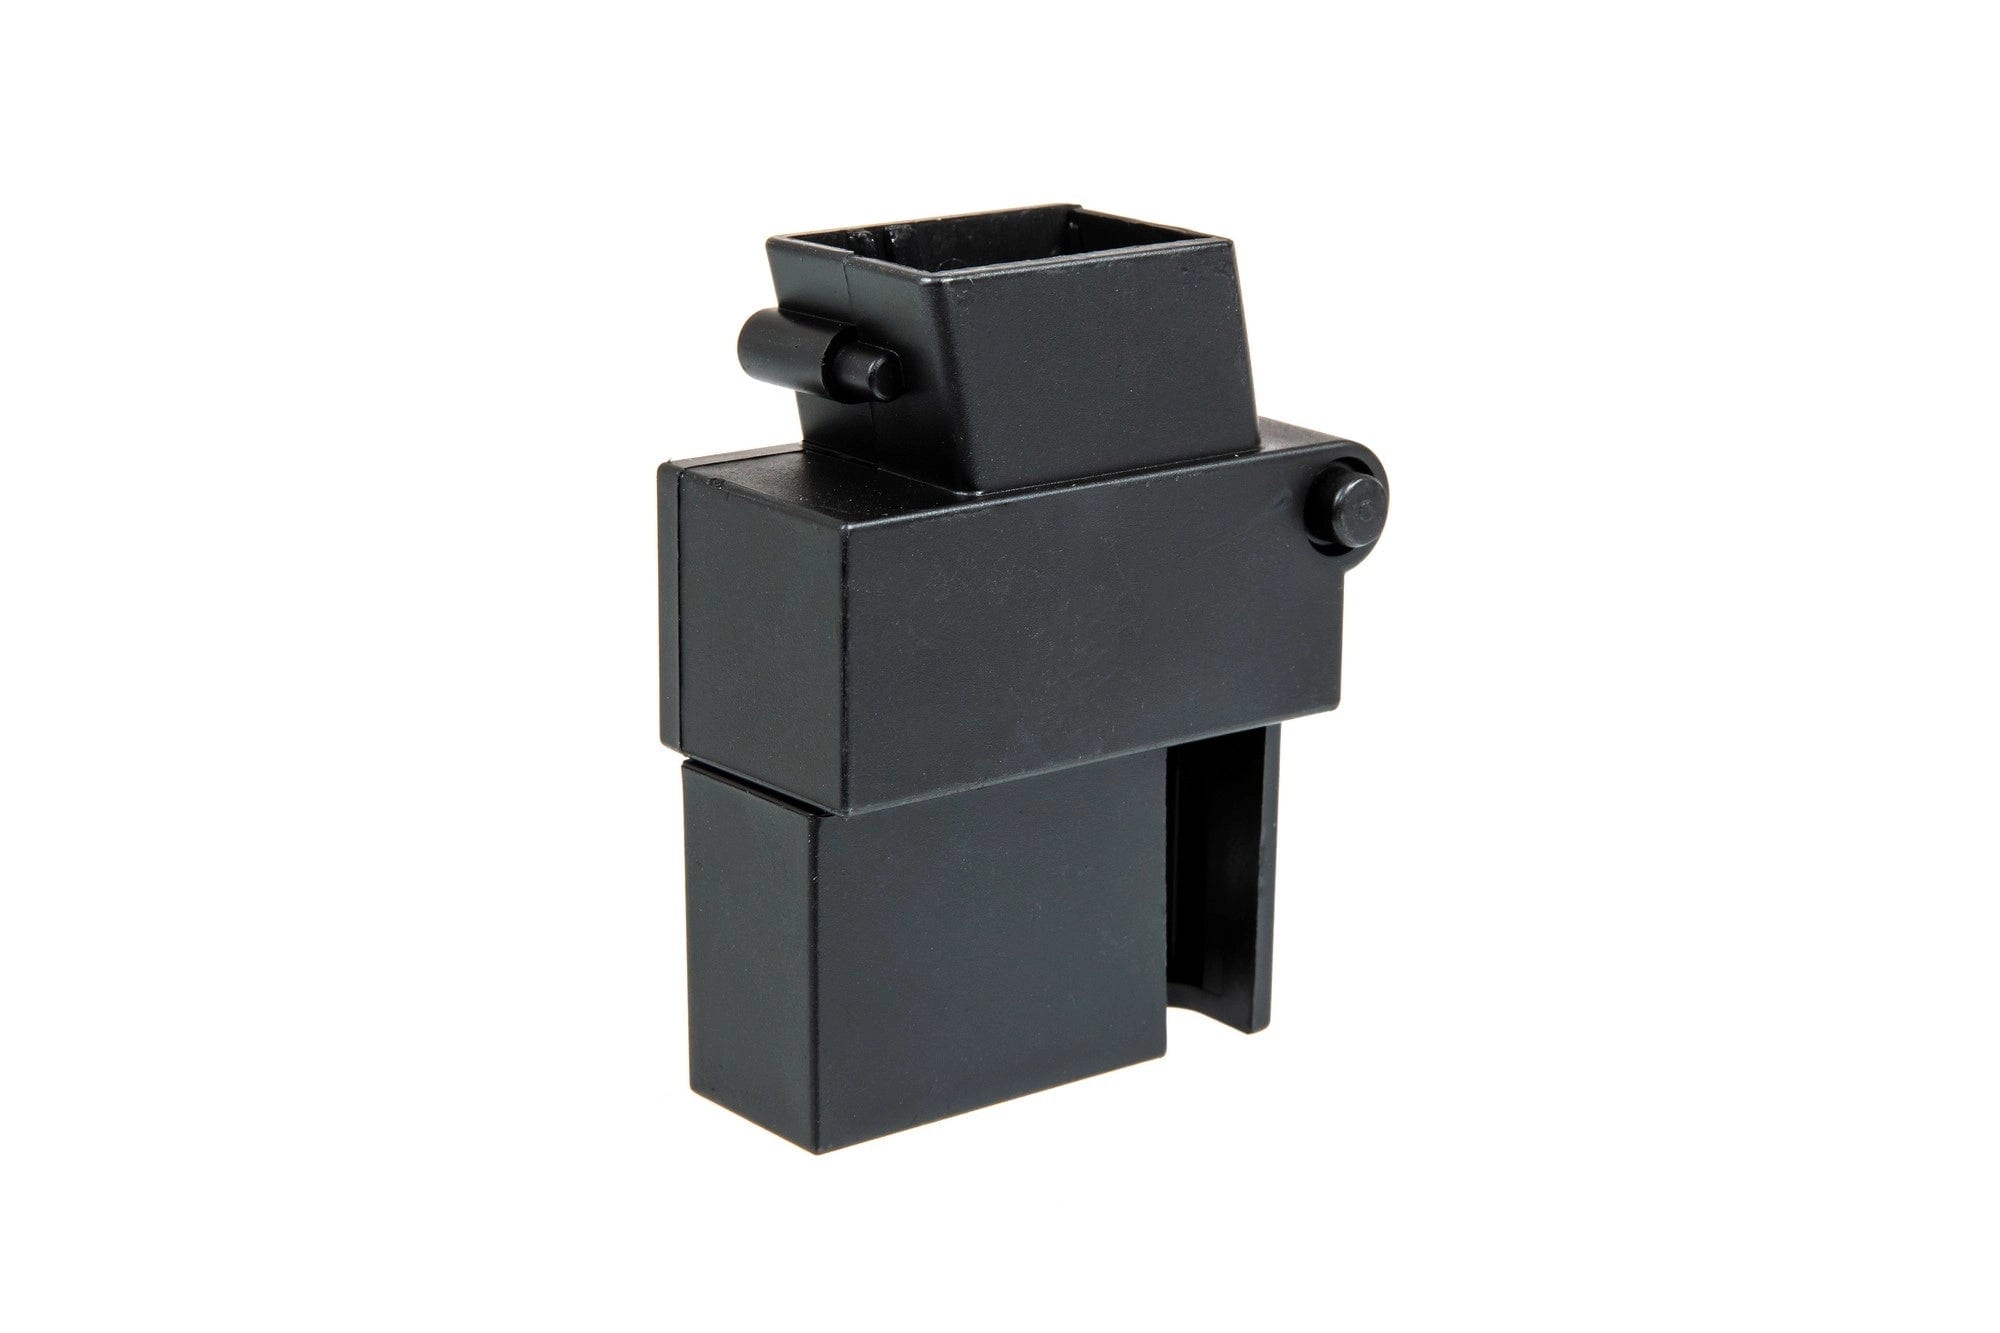 Speedloader Adapter for MP5 Magazines